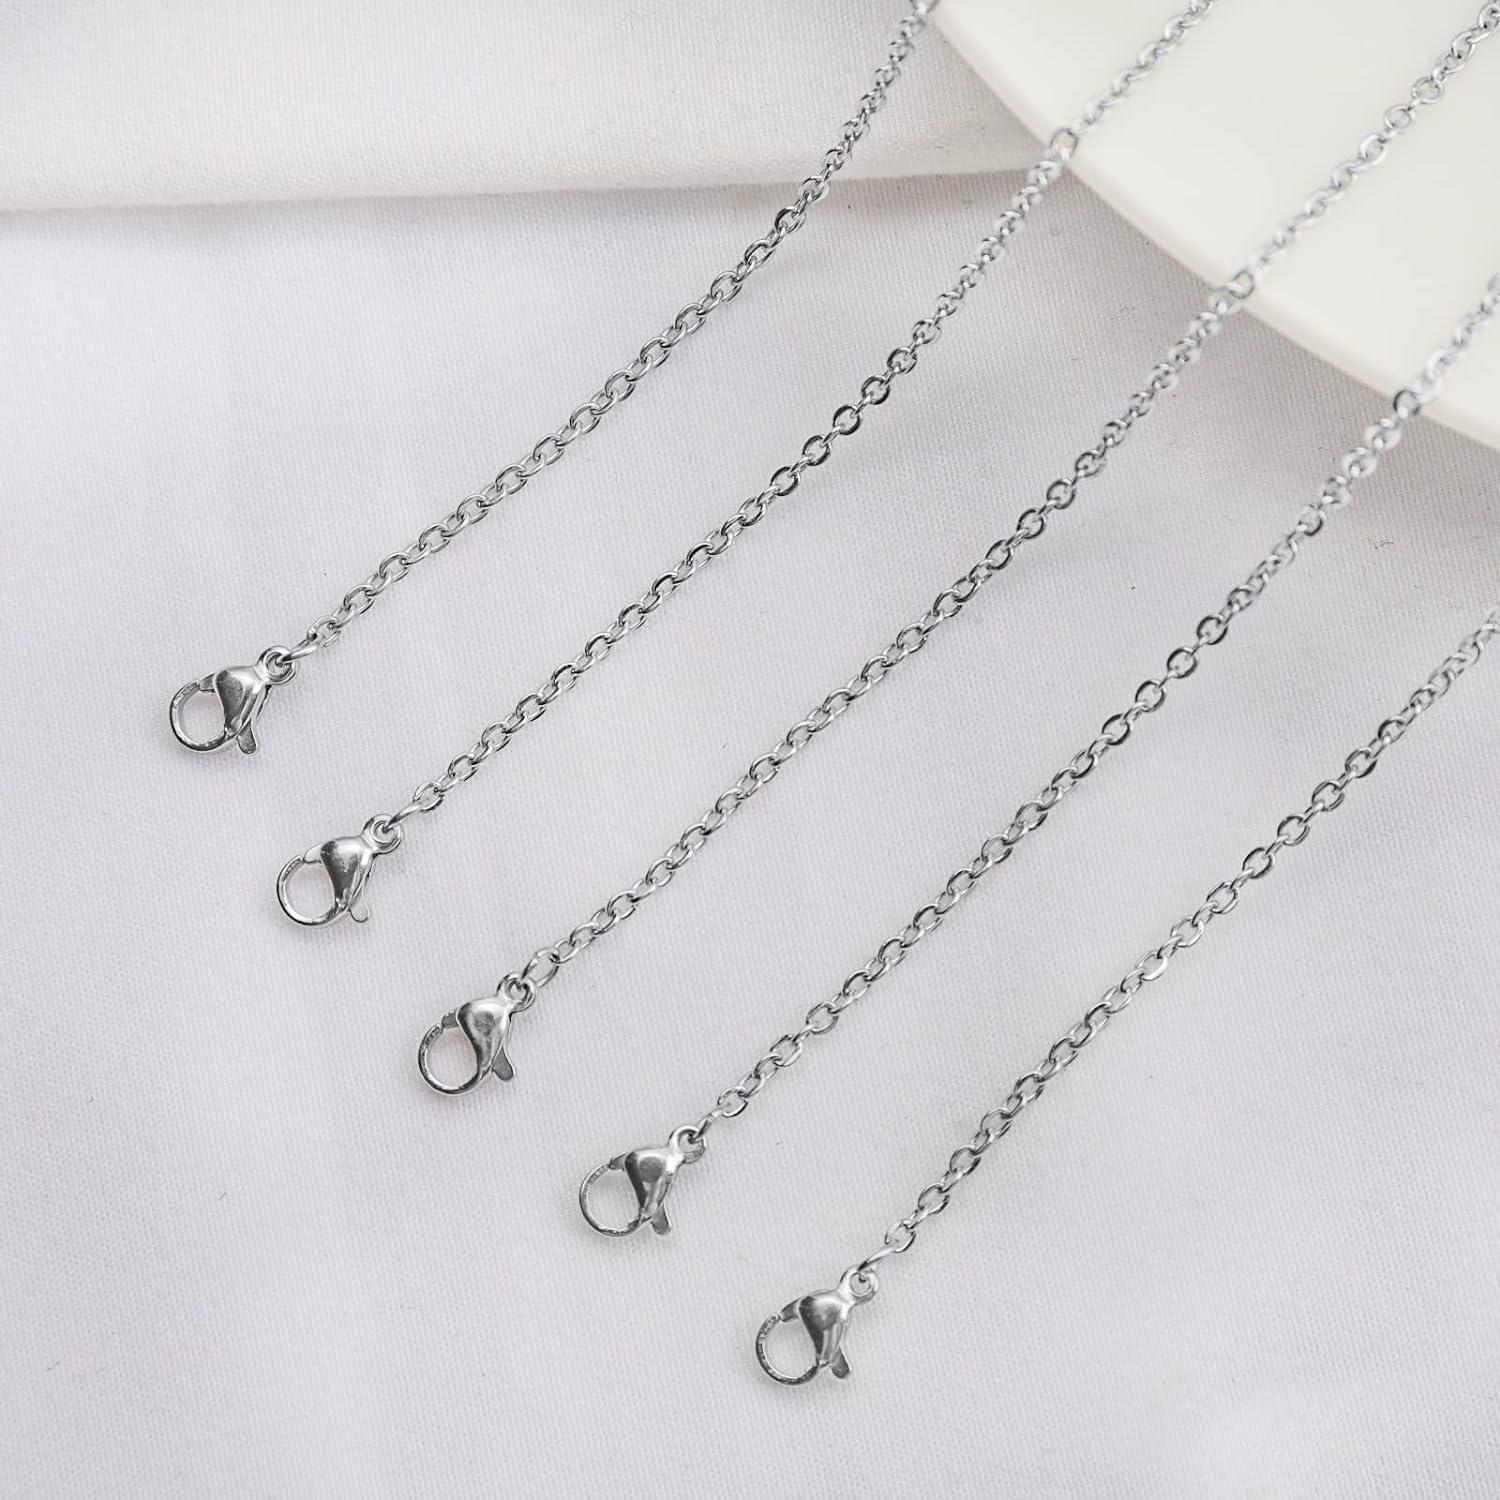 30 Pack Necklace Chains 2mm Stainless Steel Link Cable Chain